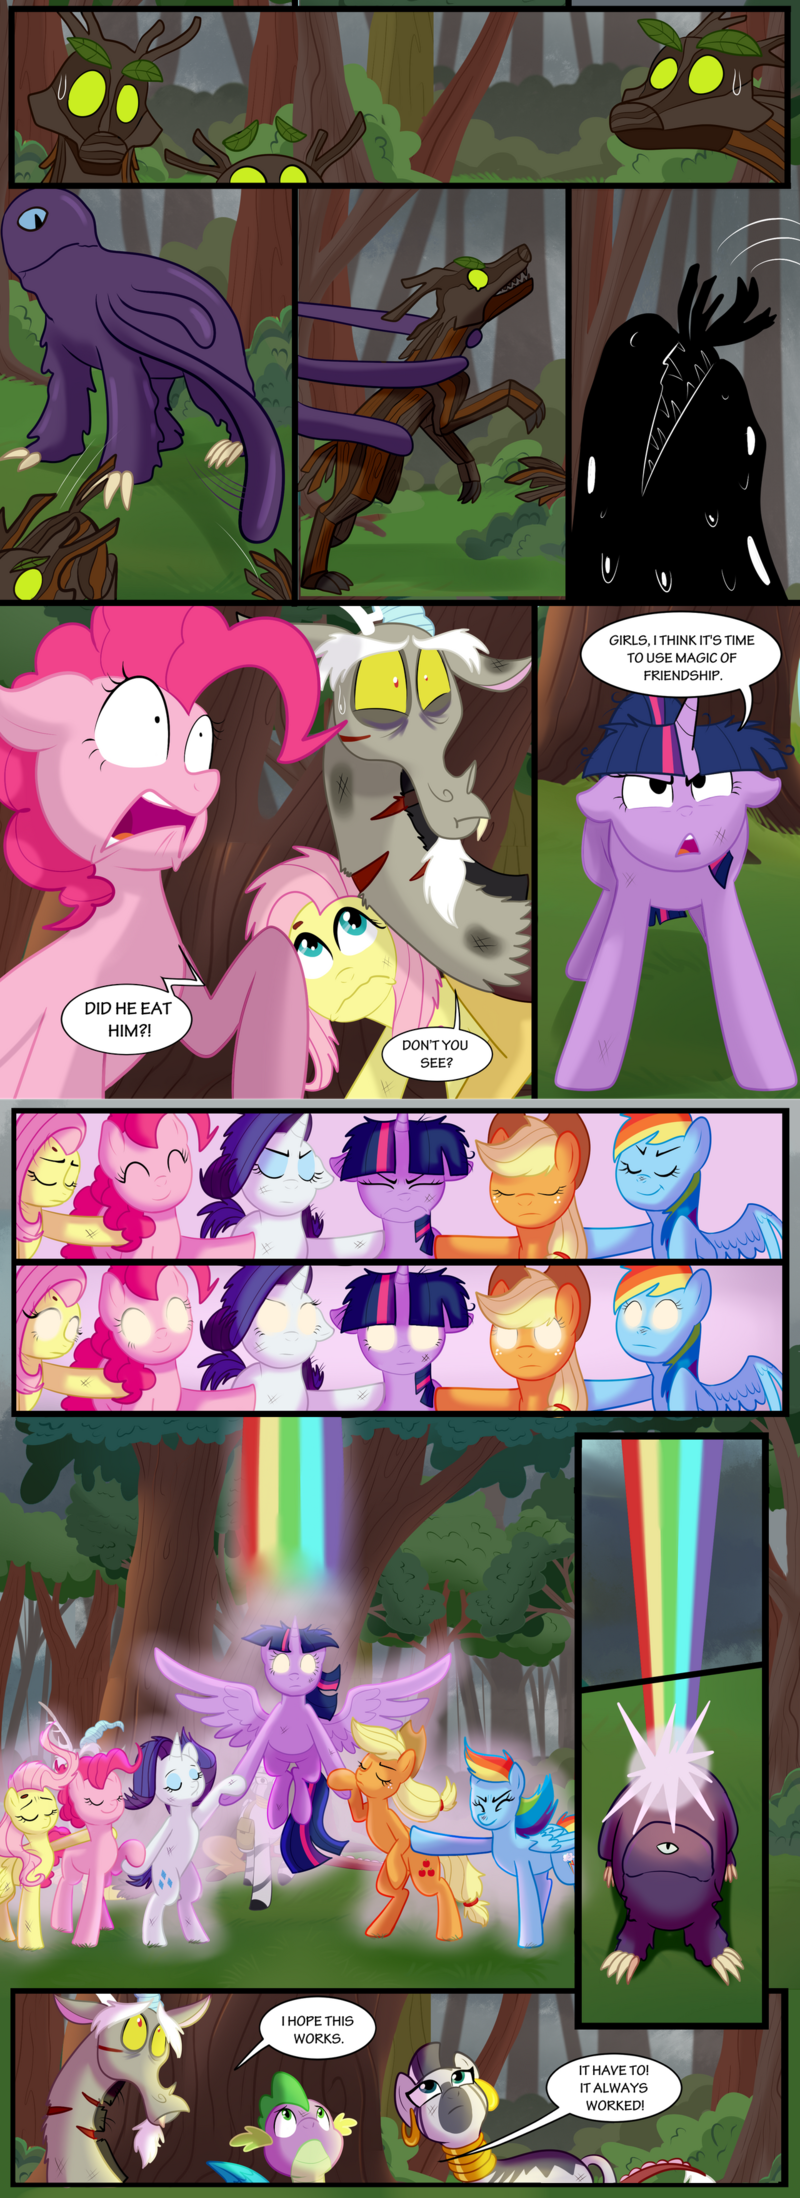 Page 139-140: Time for rainbow